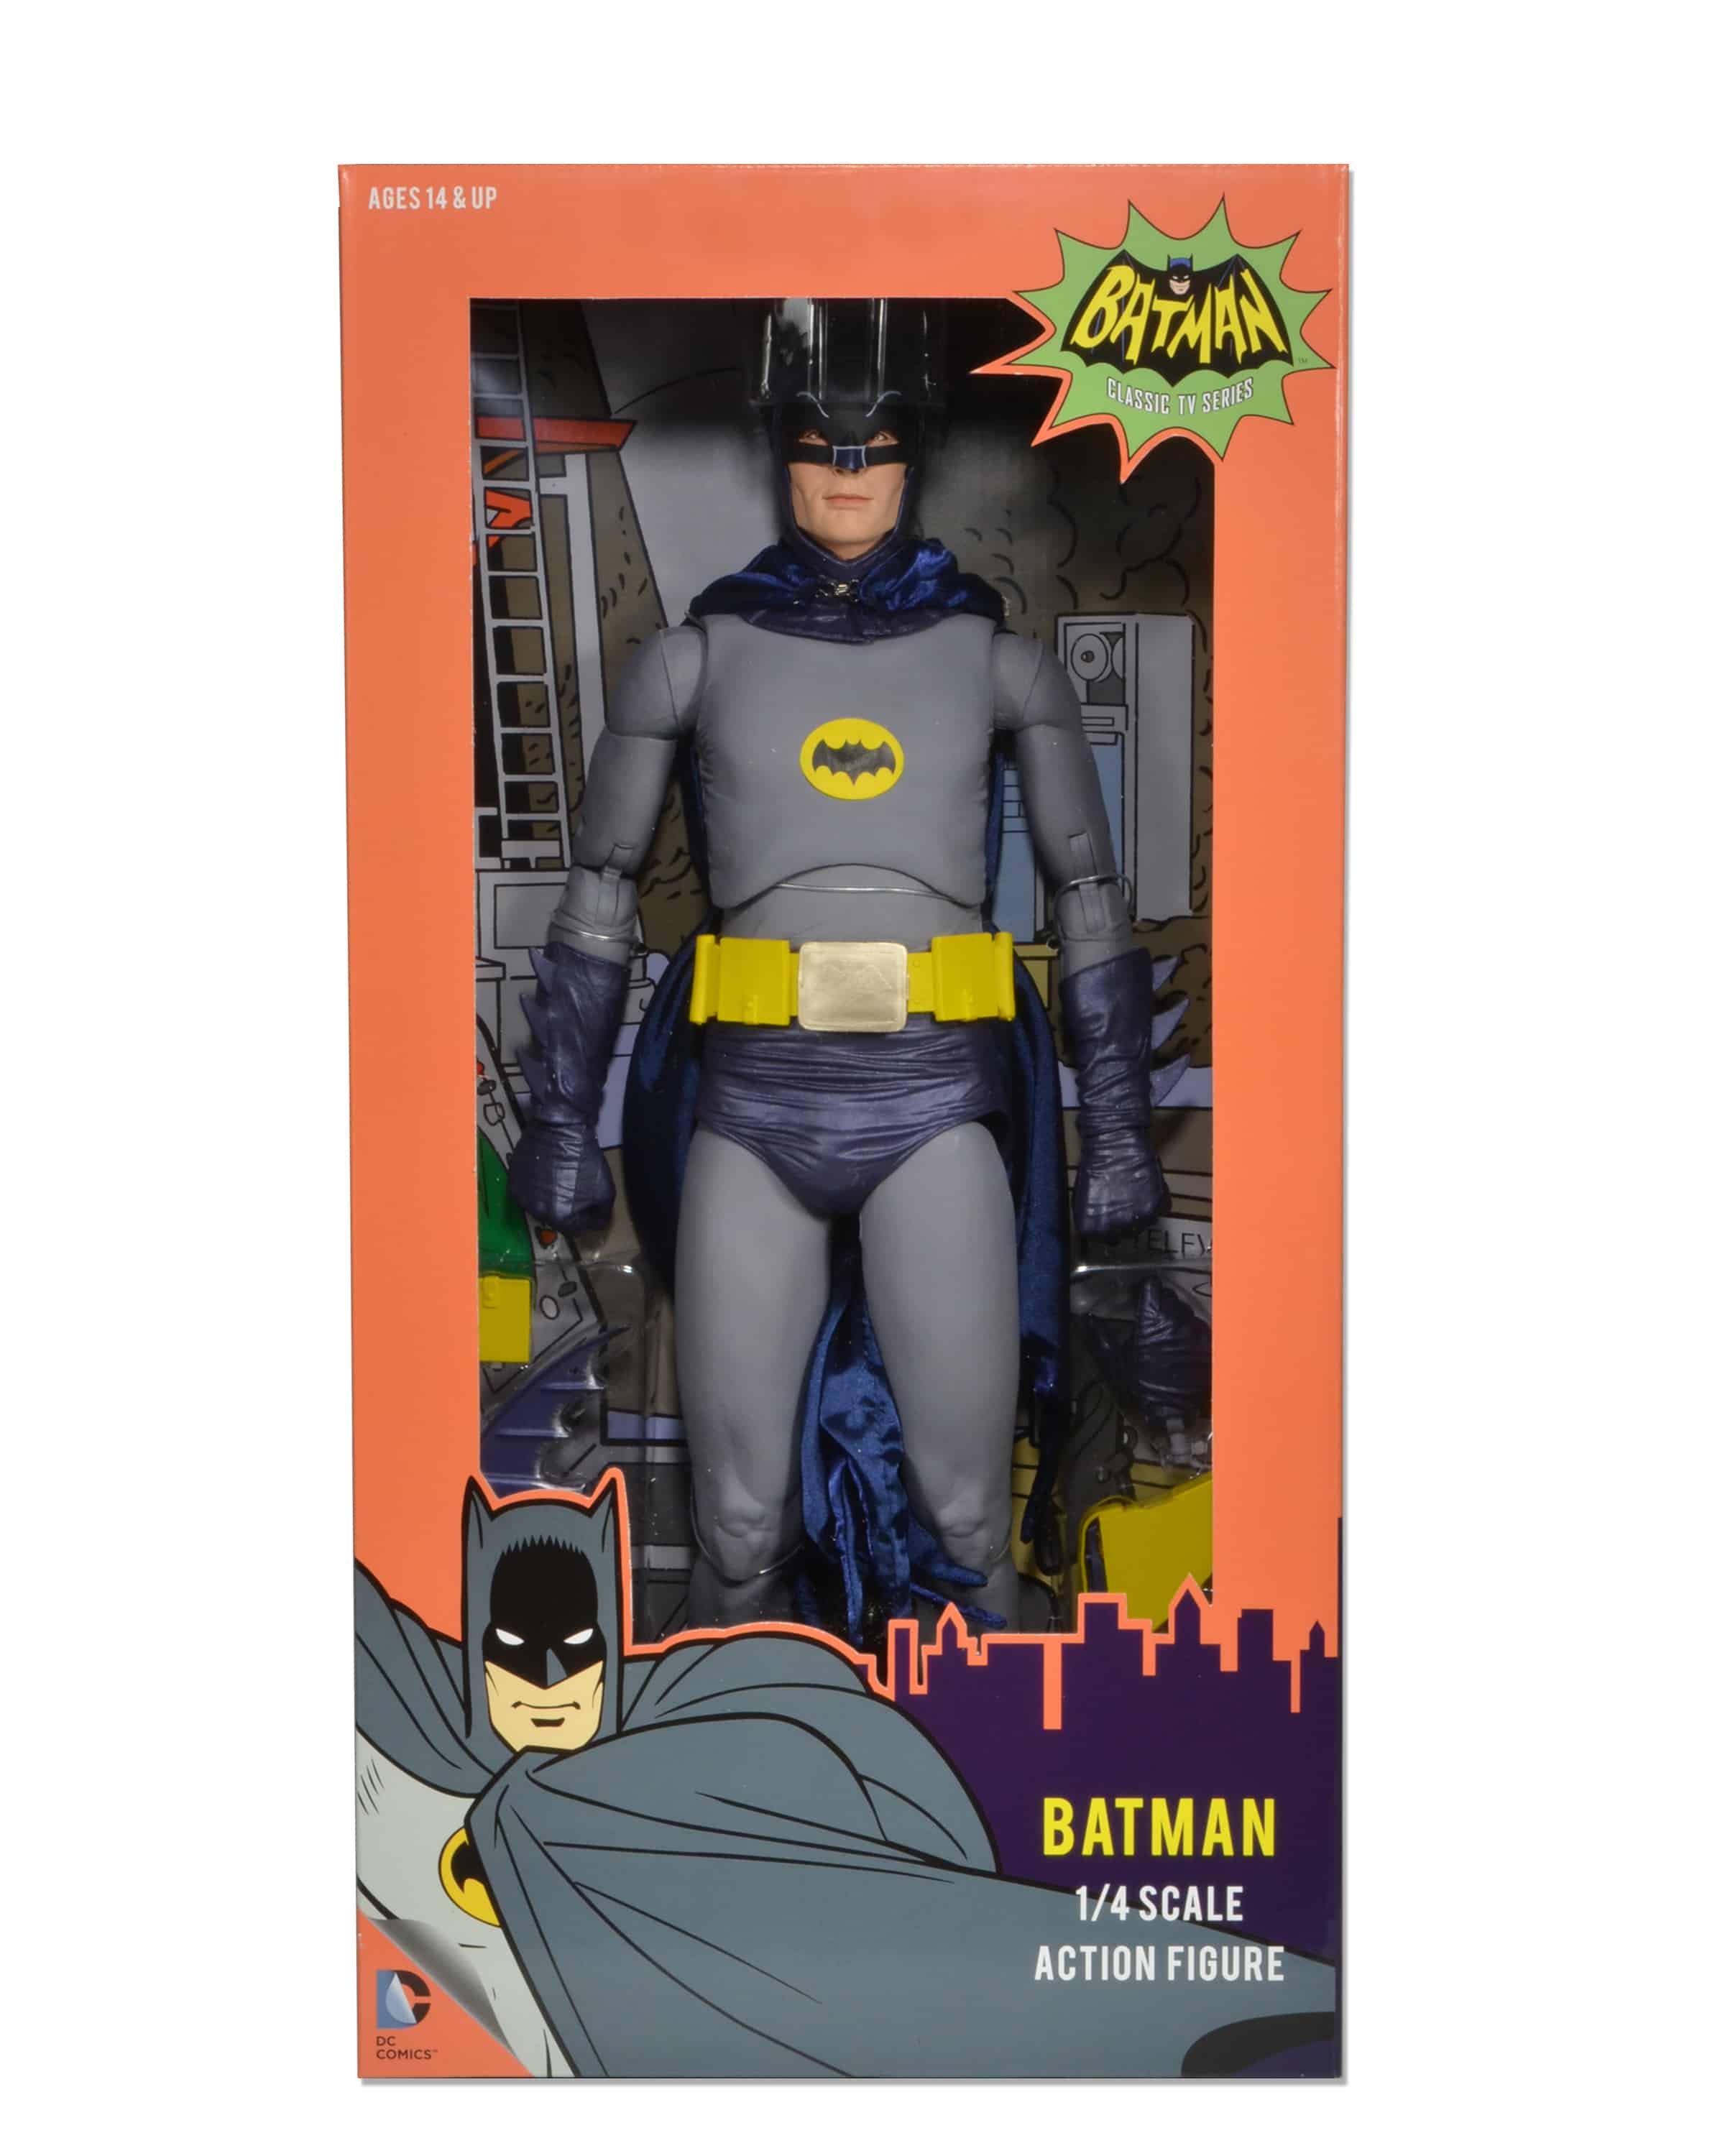 The NECA Vault reopens with limited edition Horror and Batman figures to close out 2022 7